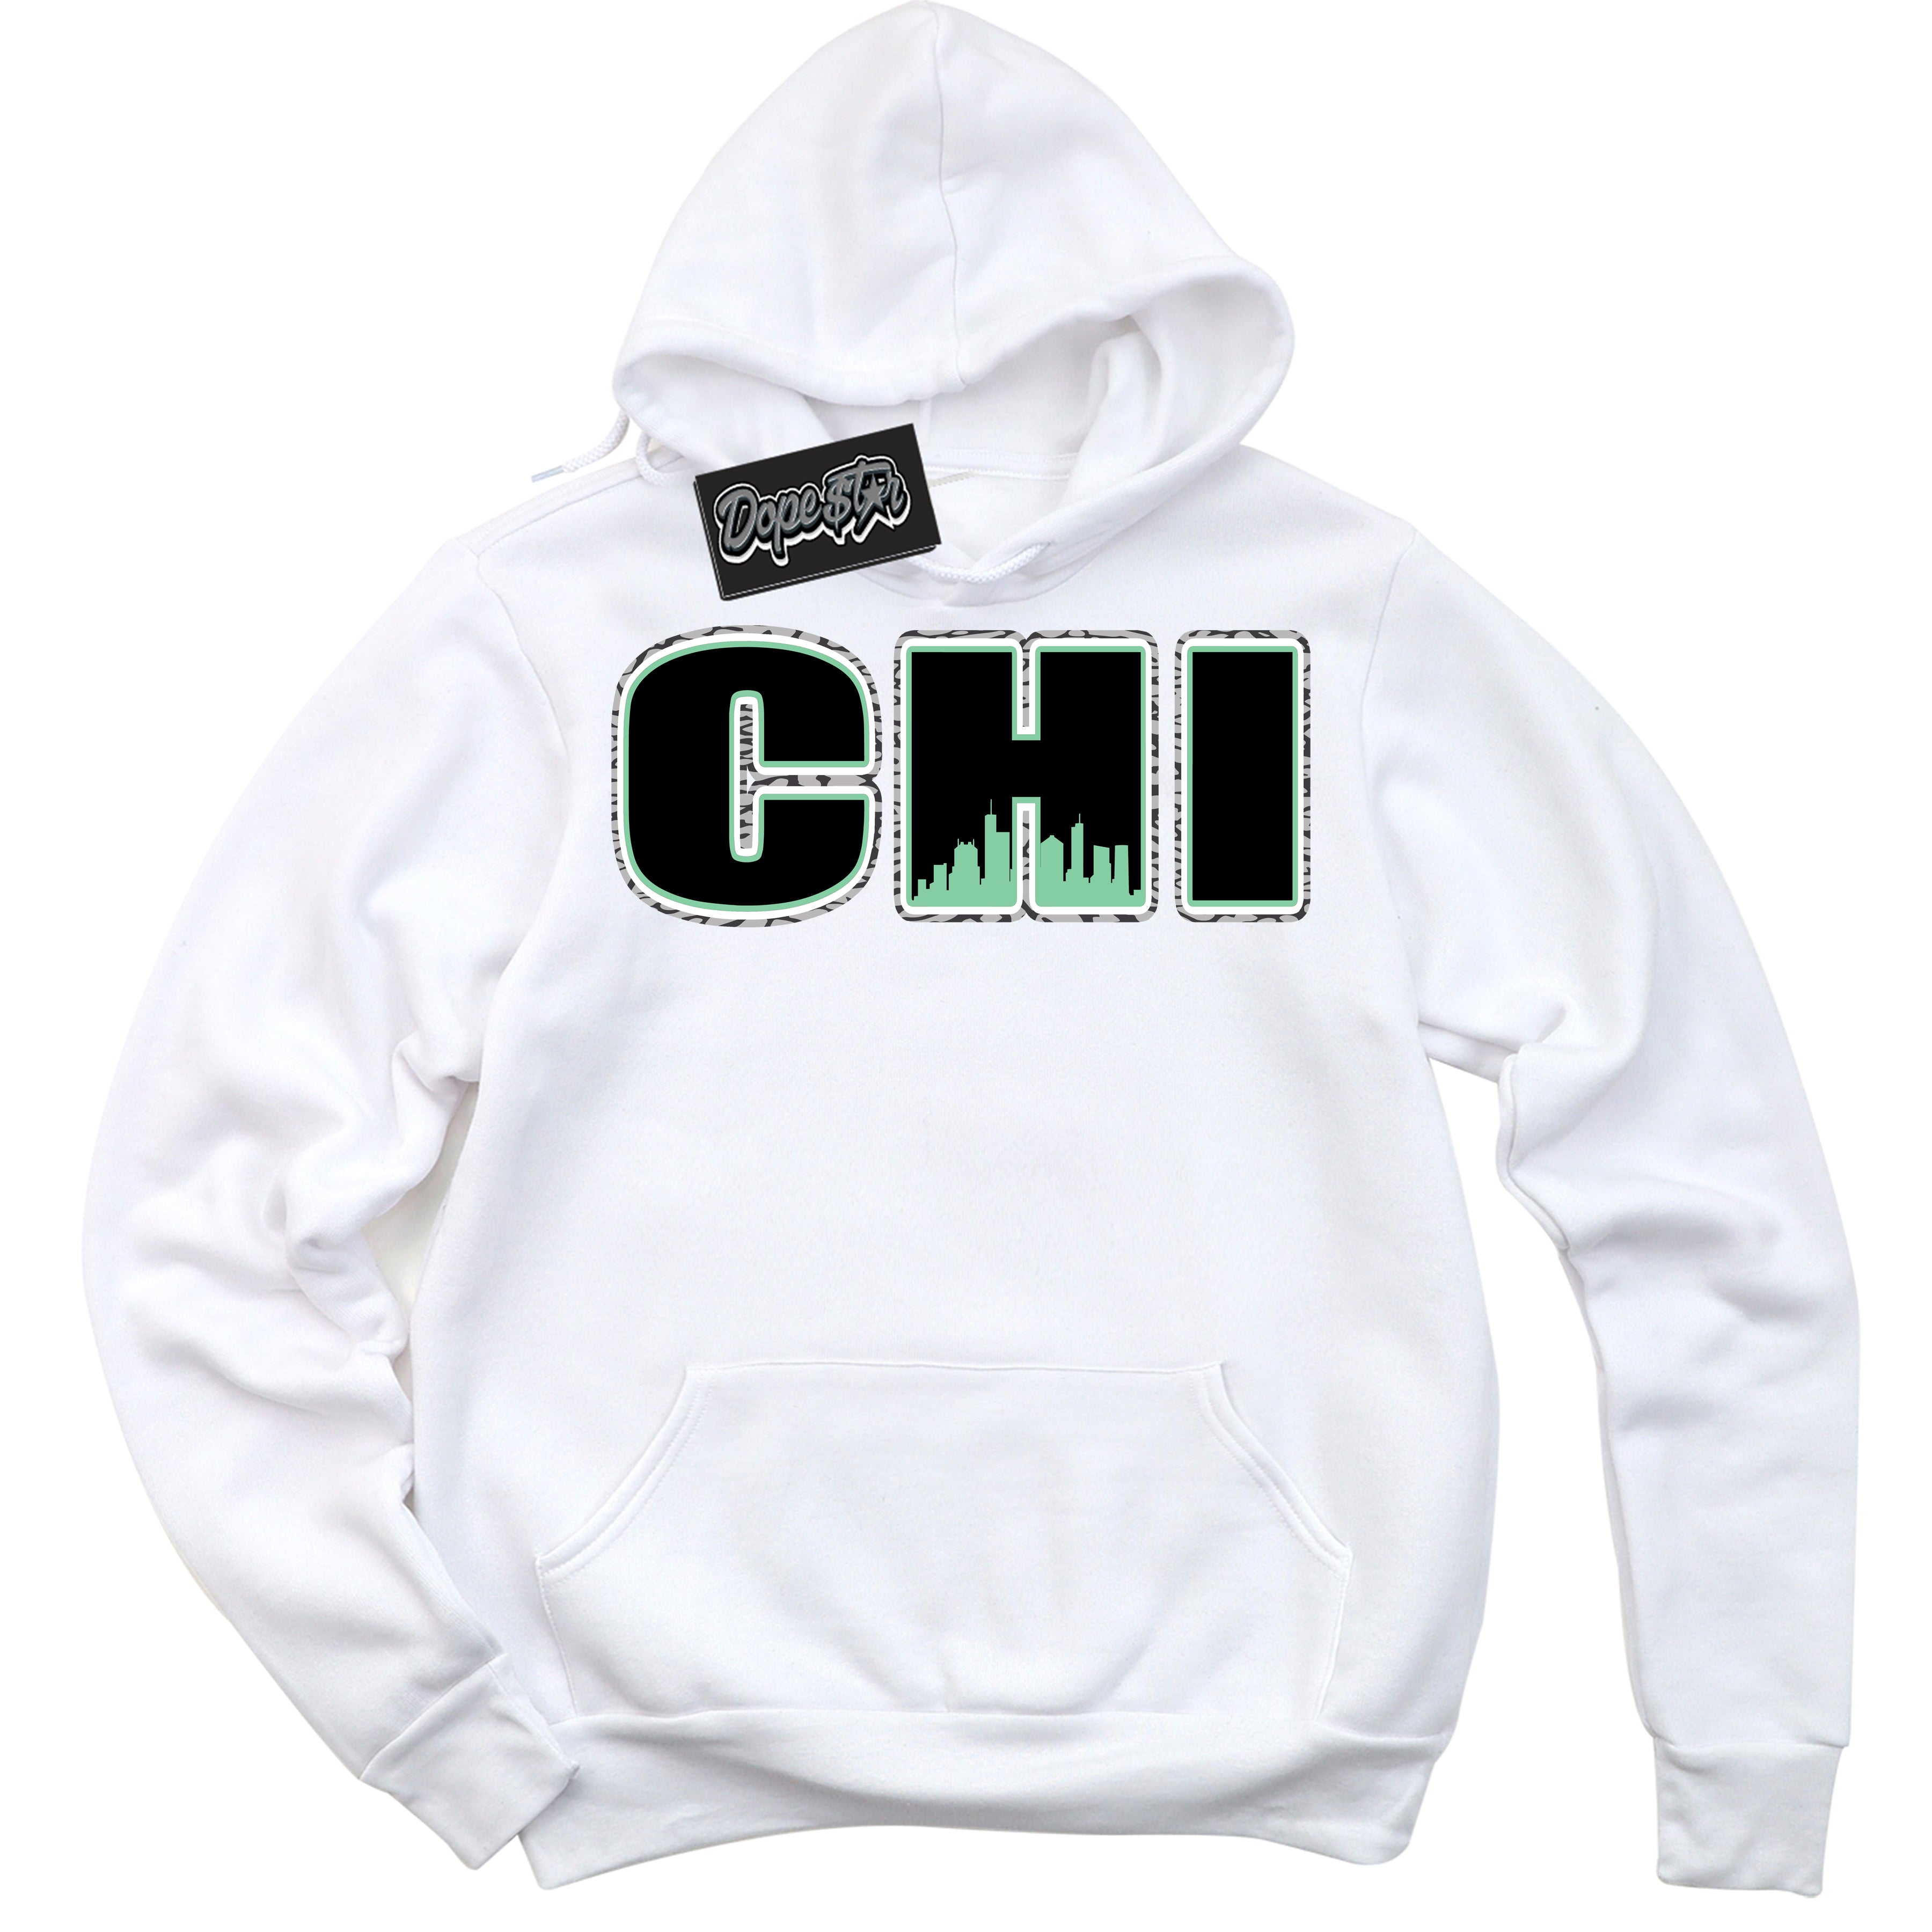 Cool White Graphic DopeStar Hoodie with “ Chicago “ print, that perfectly matches Green Glow 3s sneakers